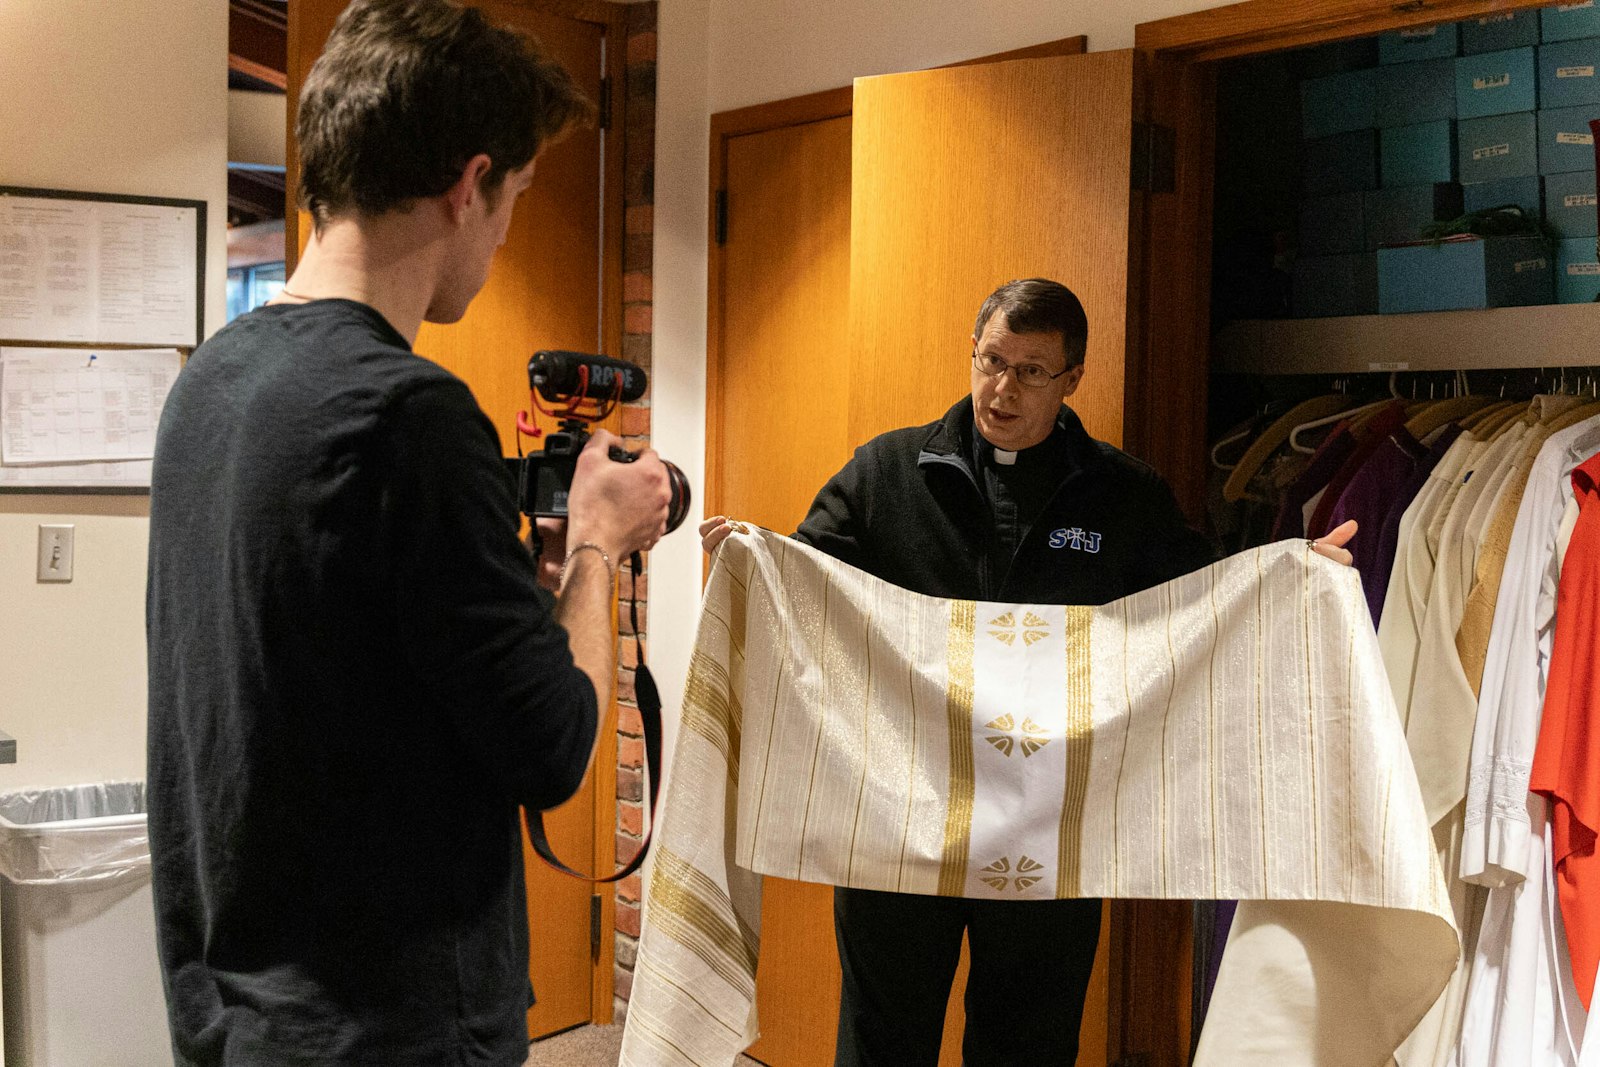 Fr. Kean explains some of the priestly vestments he wears as Sasak films in the sacristy of St. Joseph the Worker Parish in Lake Orion.